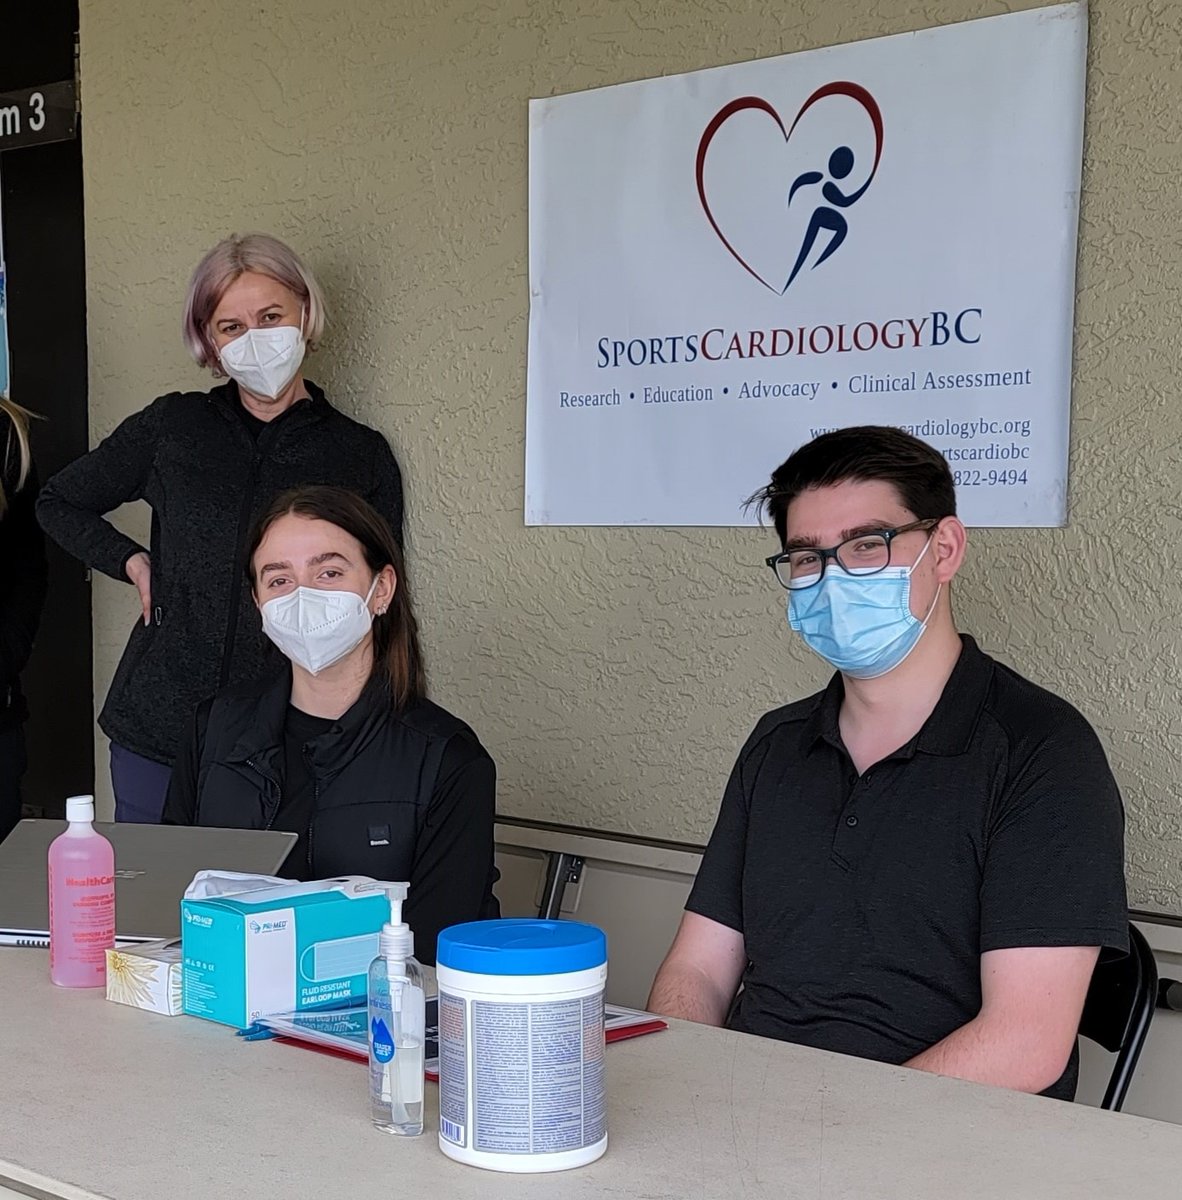 The SCBC team has been busy with heart screenings this summer! ❤️ We have been focusing on cardiac testing for young athletes and first responders. Interested in learning more about our initiatives? Check out our research page at sportscardiologybc.org/research